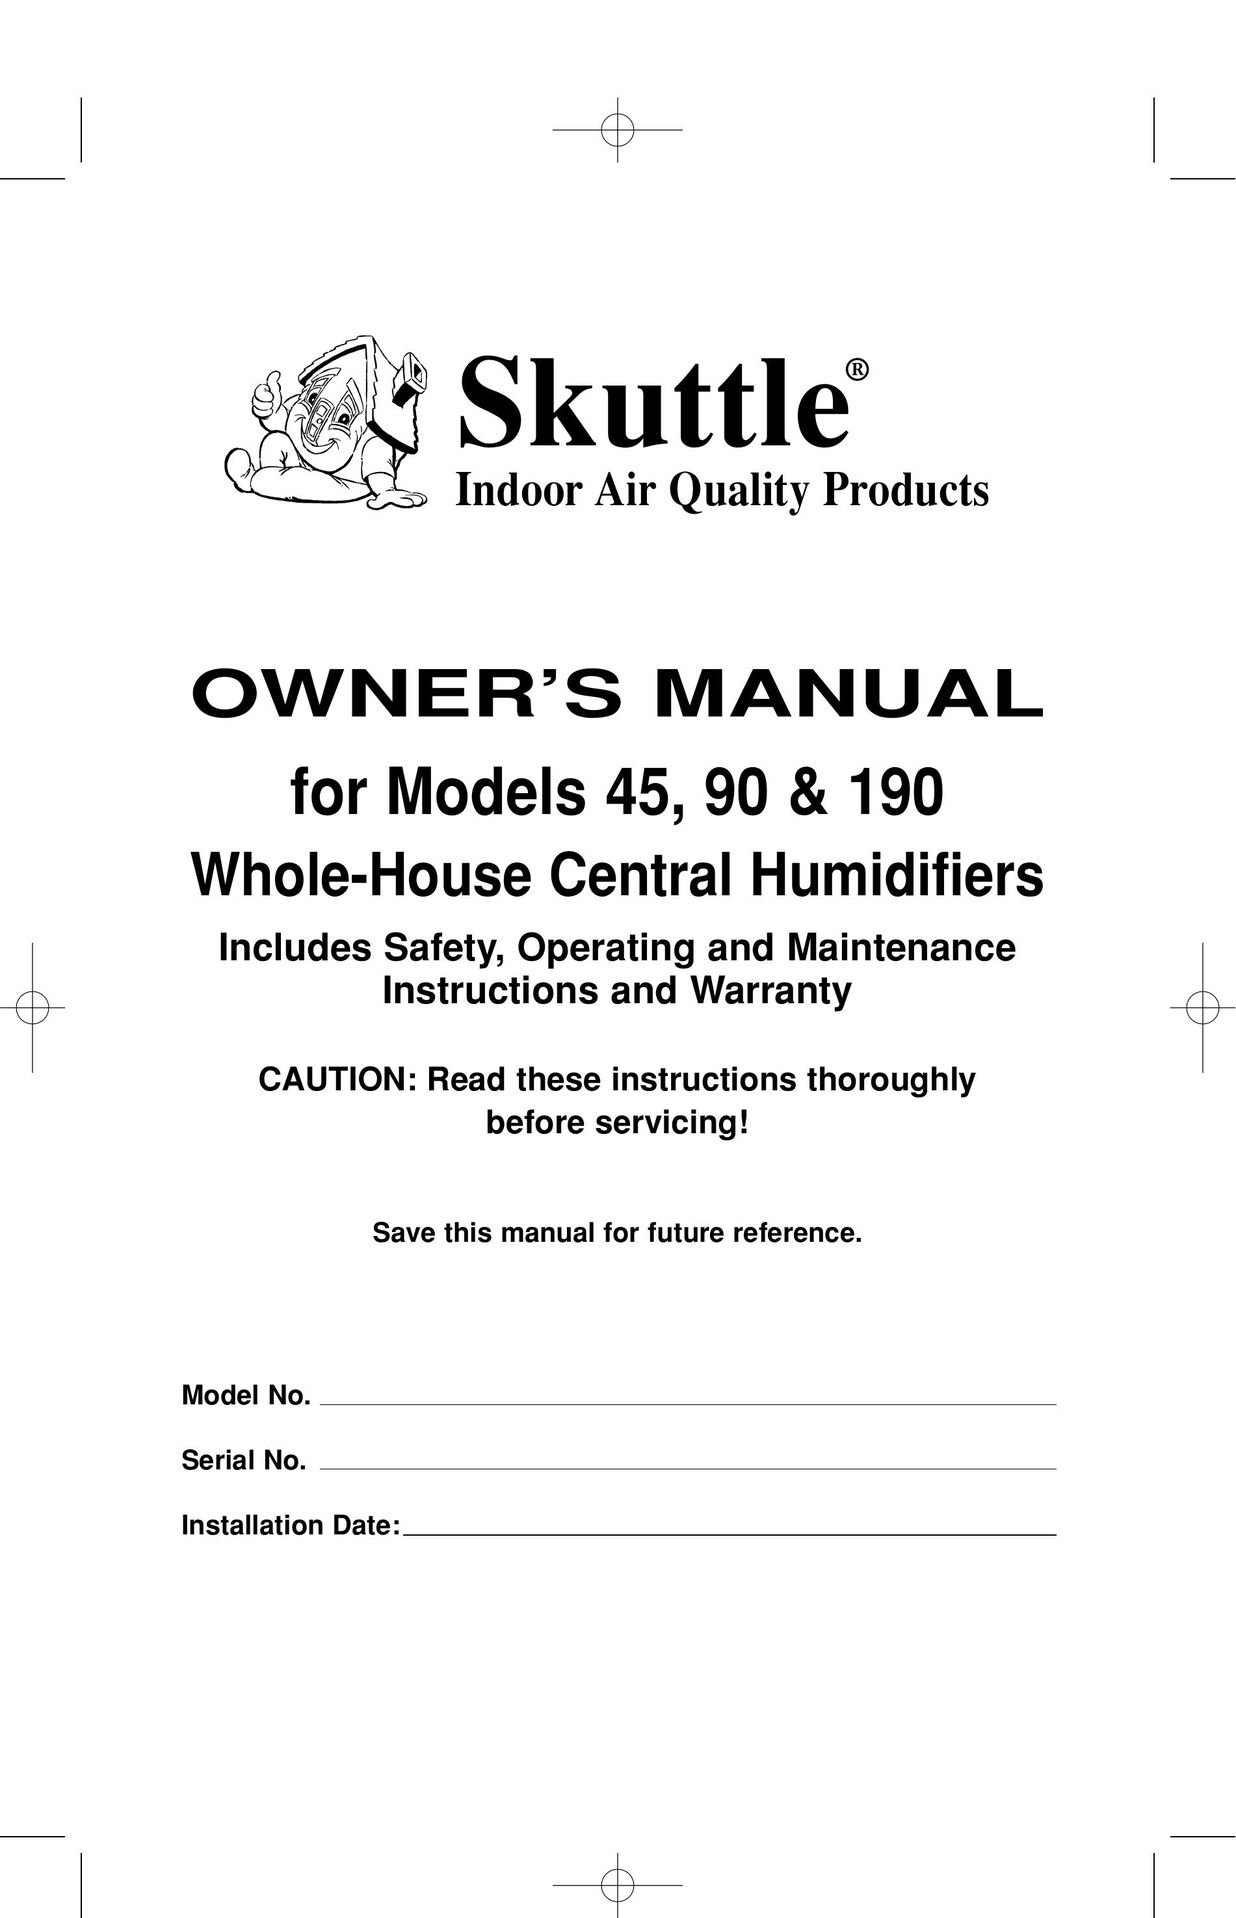 Skuttle Indoor Air Quality Products 45 Humidifier User Manual